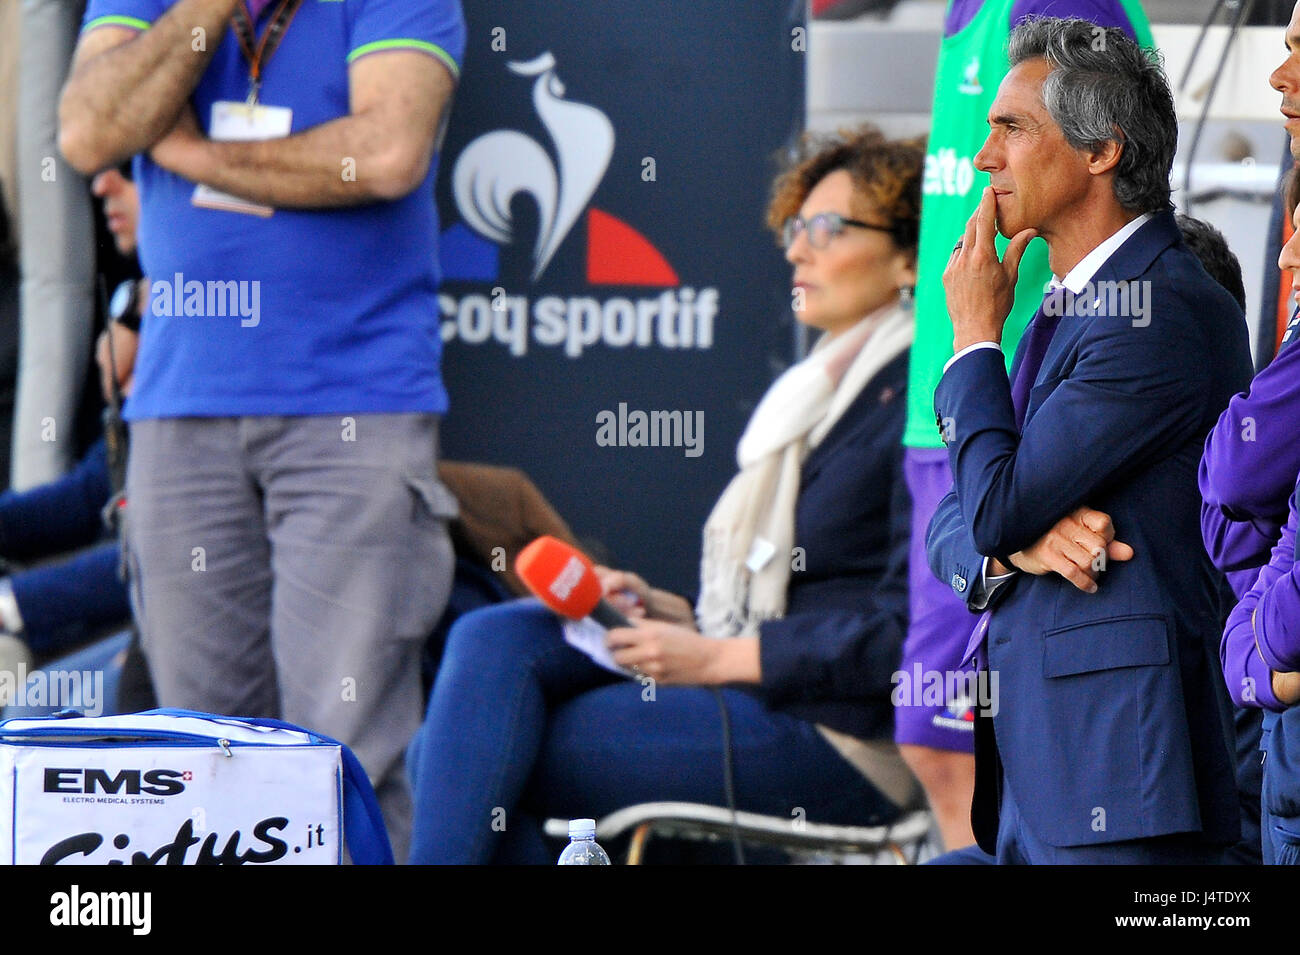 Florence, Italy. 13th May, 2017. A.c.f. Fiorentina's head coach Paulo Sousa gestures during the Italian Serie A soccer match between A.c.f. Fiorentina and S.S. Lazio at Artemio Franchi Stadium. Credit: Giacomo Morini/Pacific Press/Alamy Live News Stock Photo